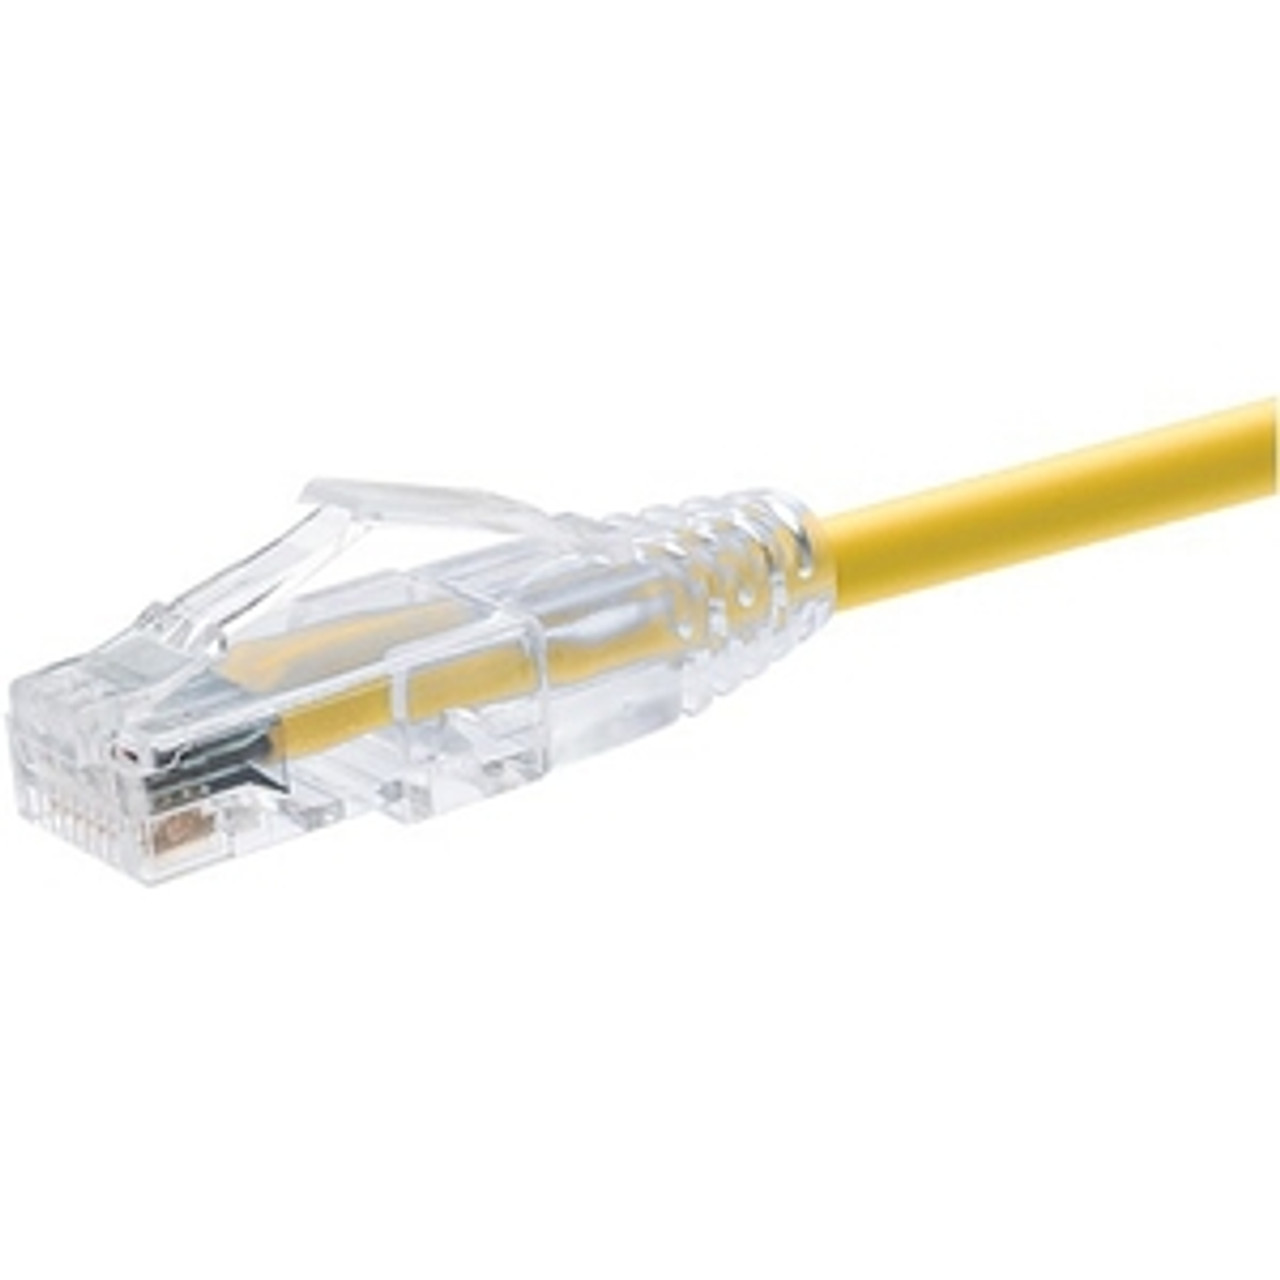 10124 Extreme Networks 10Gbps 10GBase-ER Single-mode Fiber 40km 1550nm Duplex LC Connector XFP Transceiver Module (Refurbished)